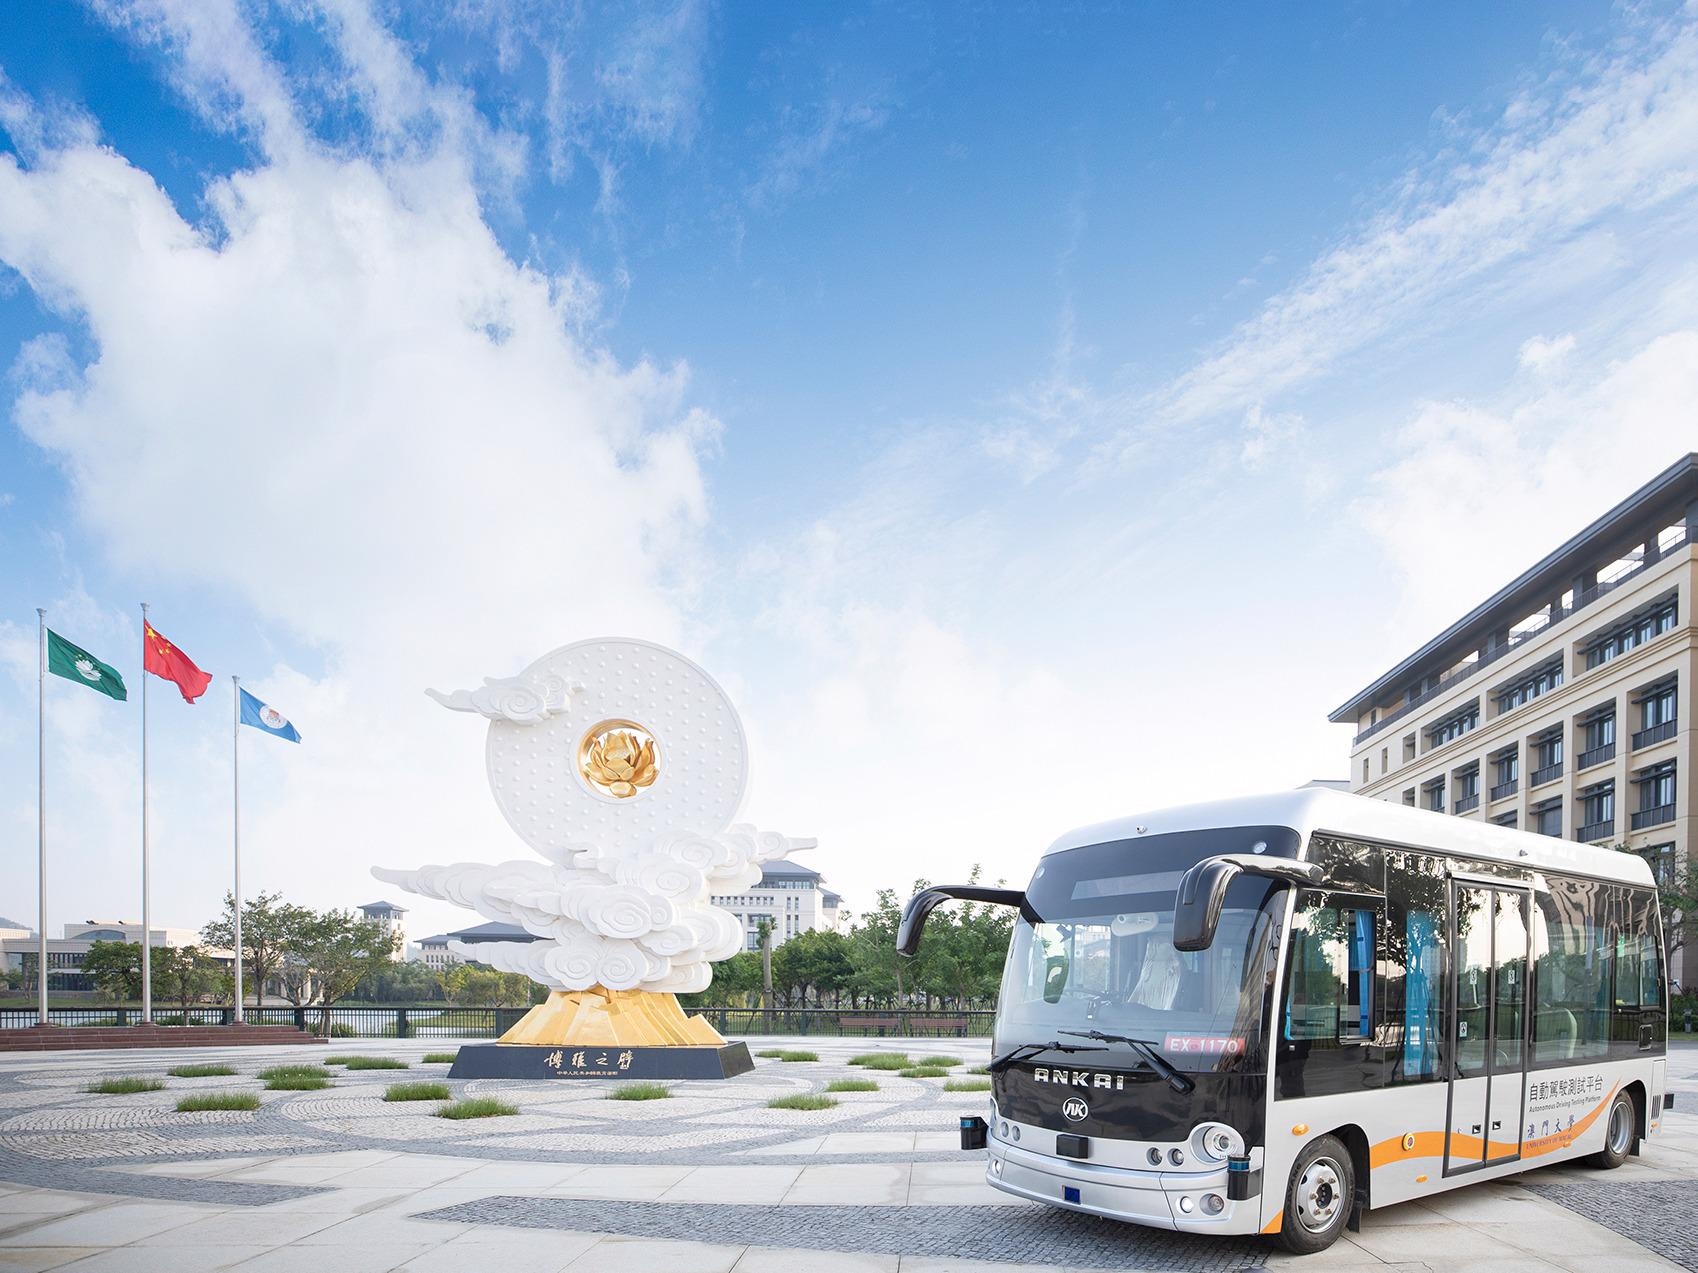 UM tests its new technologies on the self-driving bus on campus. Image Credit: University of Macau.